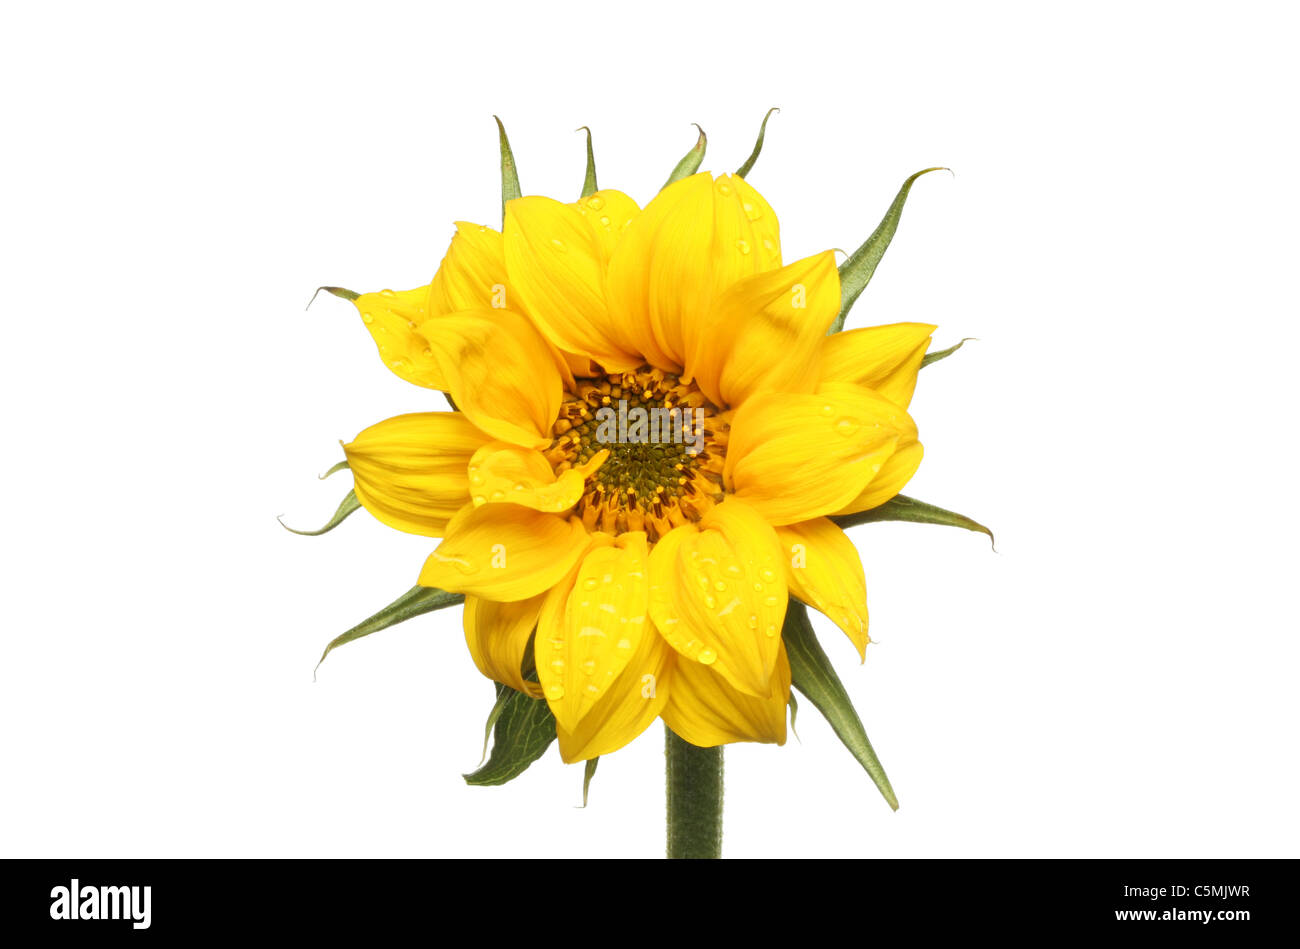 Water droplets on the yellow petals of a Sunflower isolated against white Stock Photo